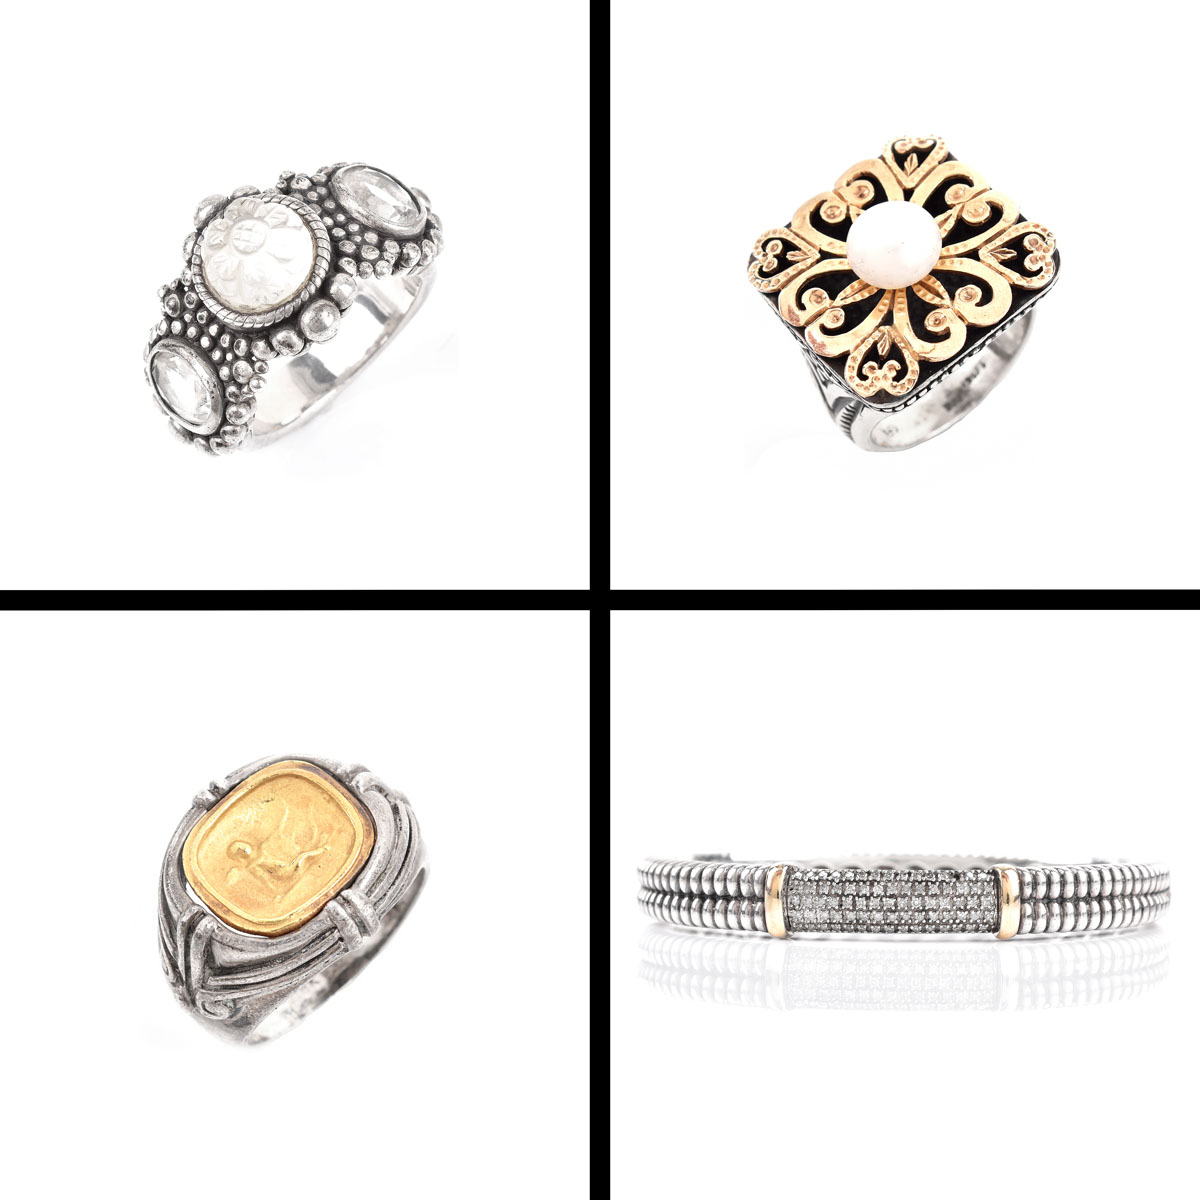 Collection of Vintage Jewelry Including: Sterling Silver and 14 Karat Yellow Gold Hinged Bangle Bracelet; Sterling Silver and 18 Karat Yellow Gold Coin Ring; Sterling Silver 14 Karat Yellow Gold and Pearl Ring and a Stephen Dweck Sterling Silver and Carve